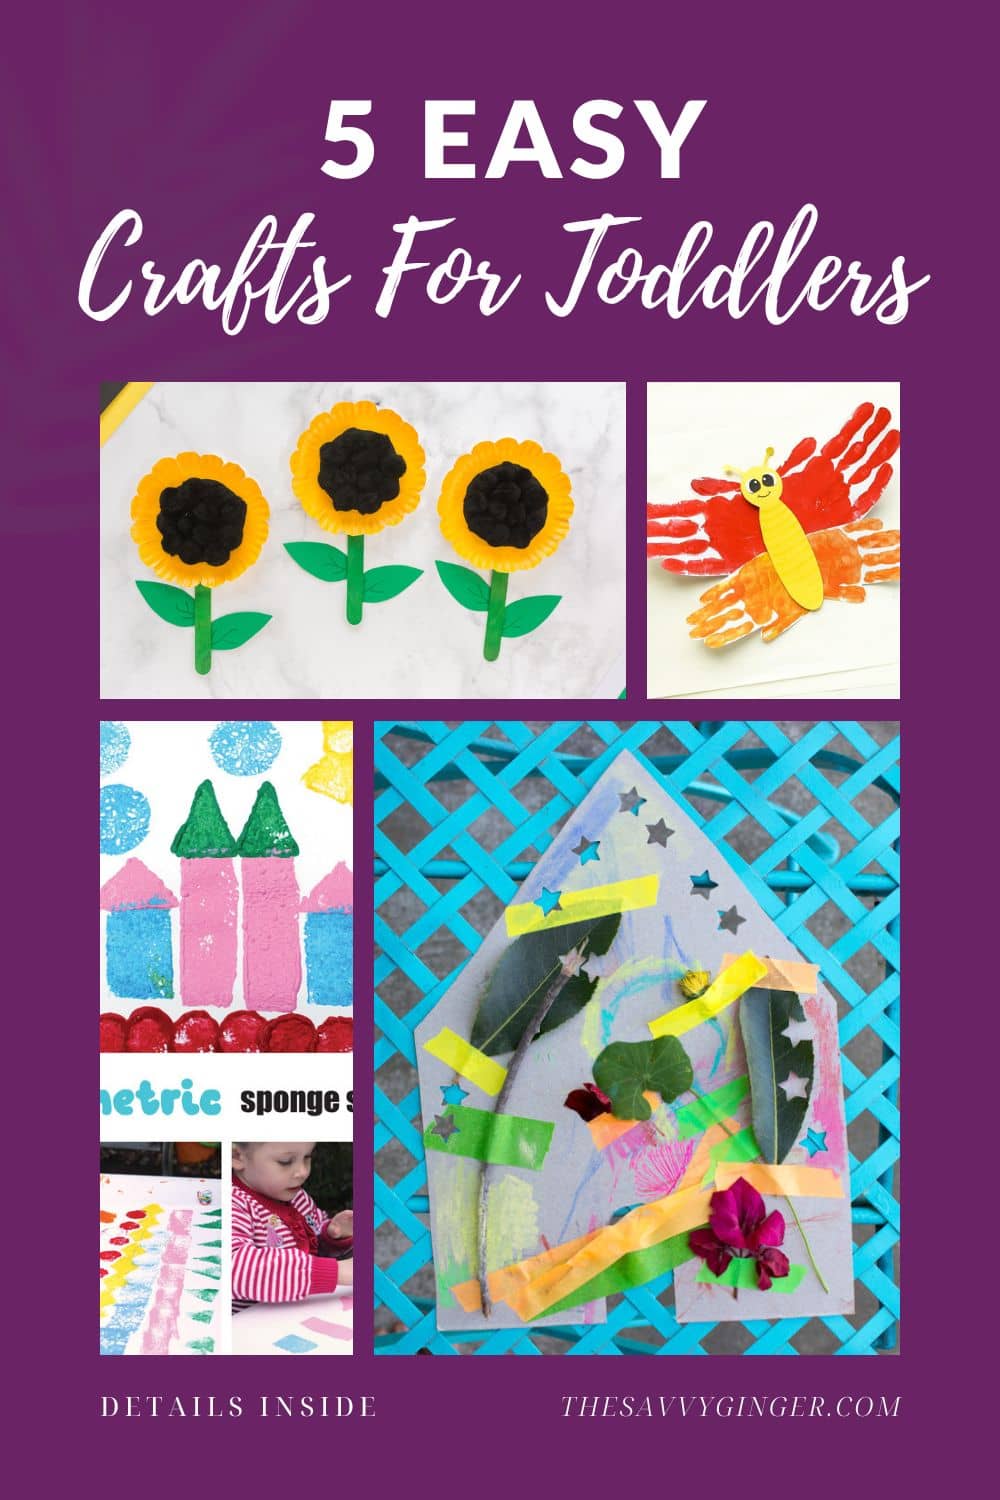 5 Easy Summer Craft Ideas For Toddlers - The Savvy Ginger